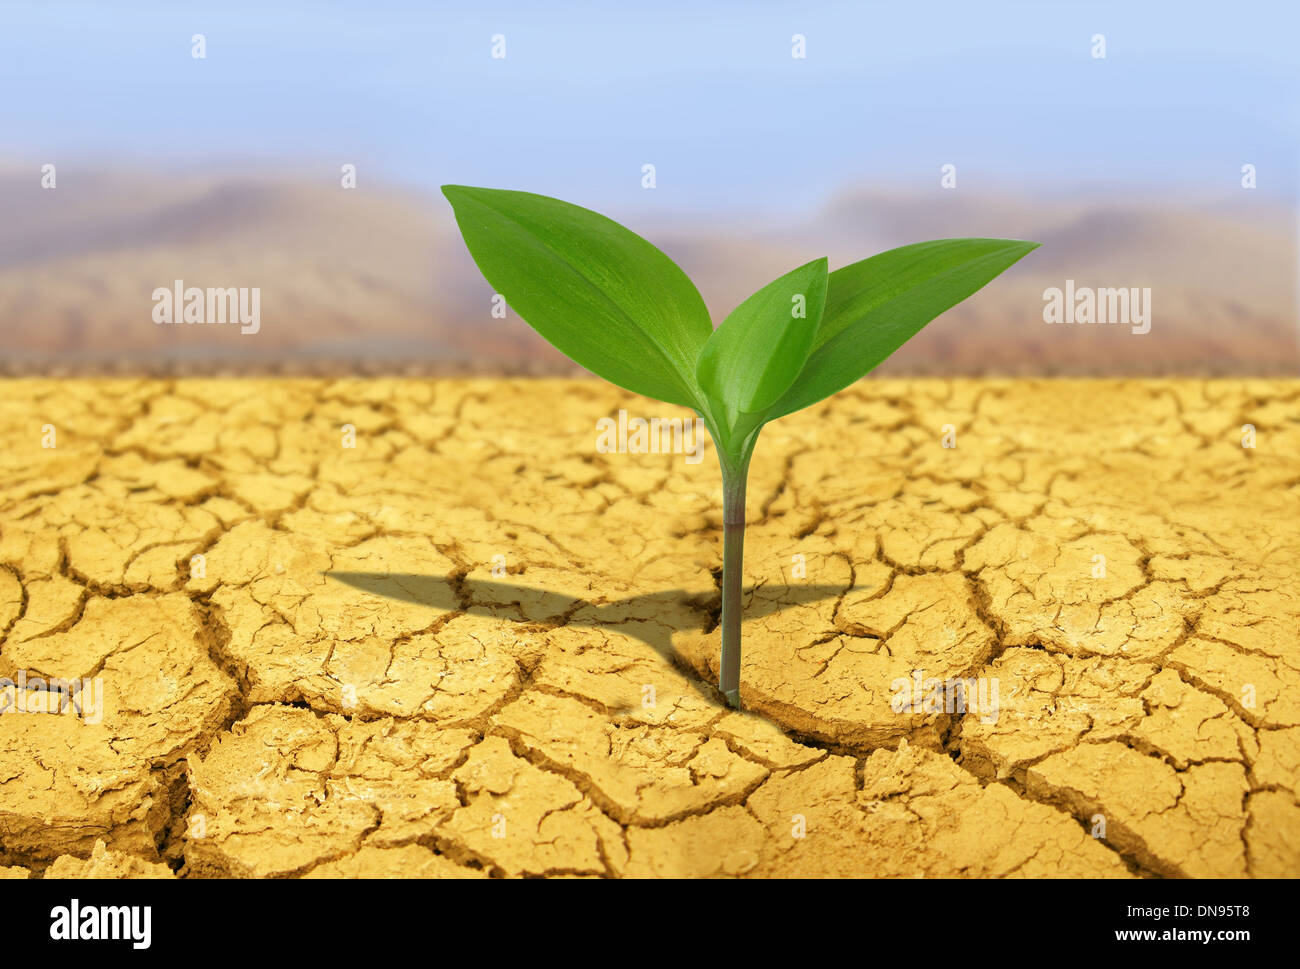 green plant on background of cracked soil Stock Photo